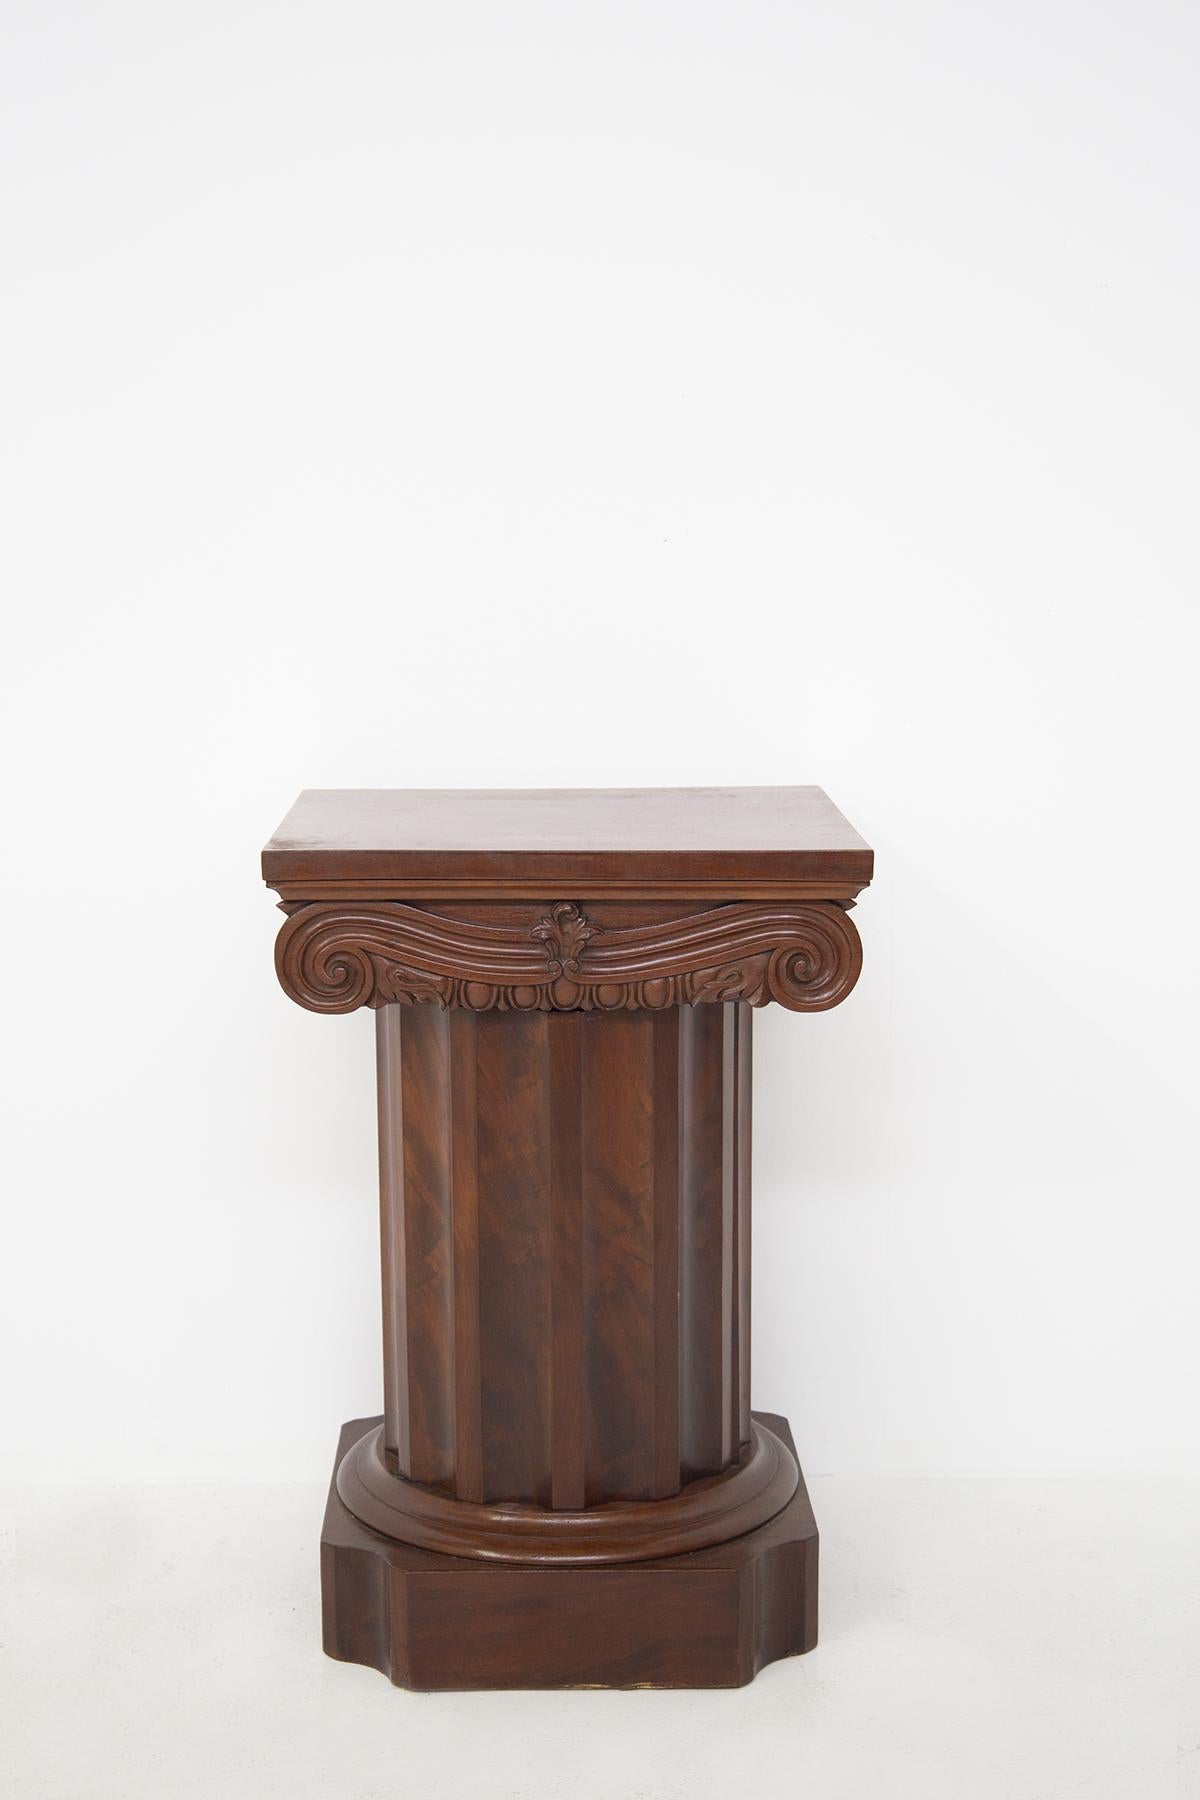 Classic and elegant Italian cocktal console table from the 1800s. Made in walnut . The console table is made with a typical Ionic column shape. Made with great skill the console hides a secret. The column opens through a door and inside there are